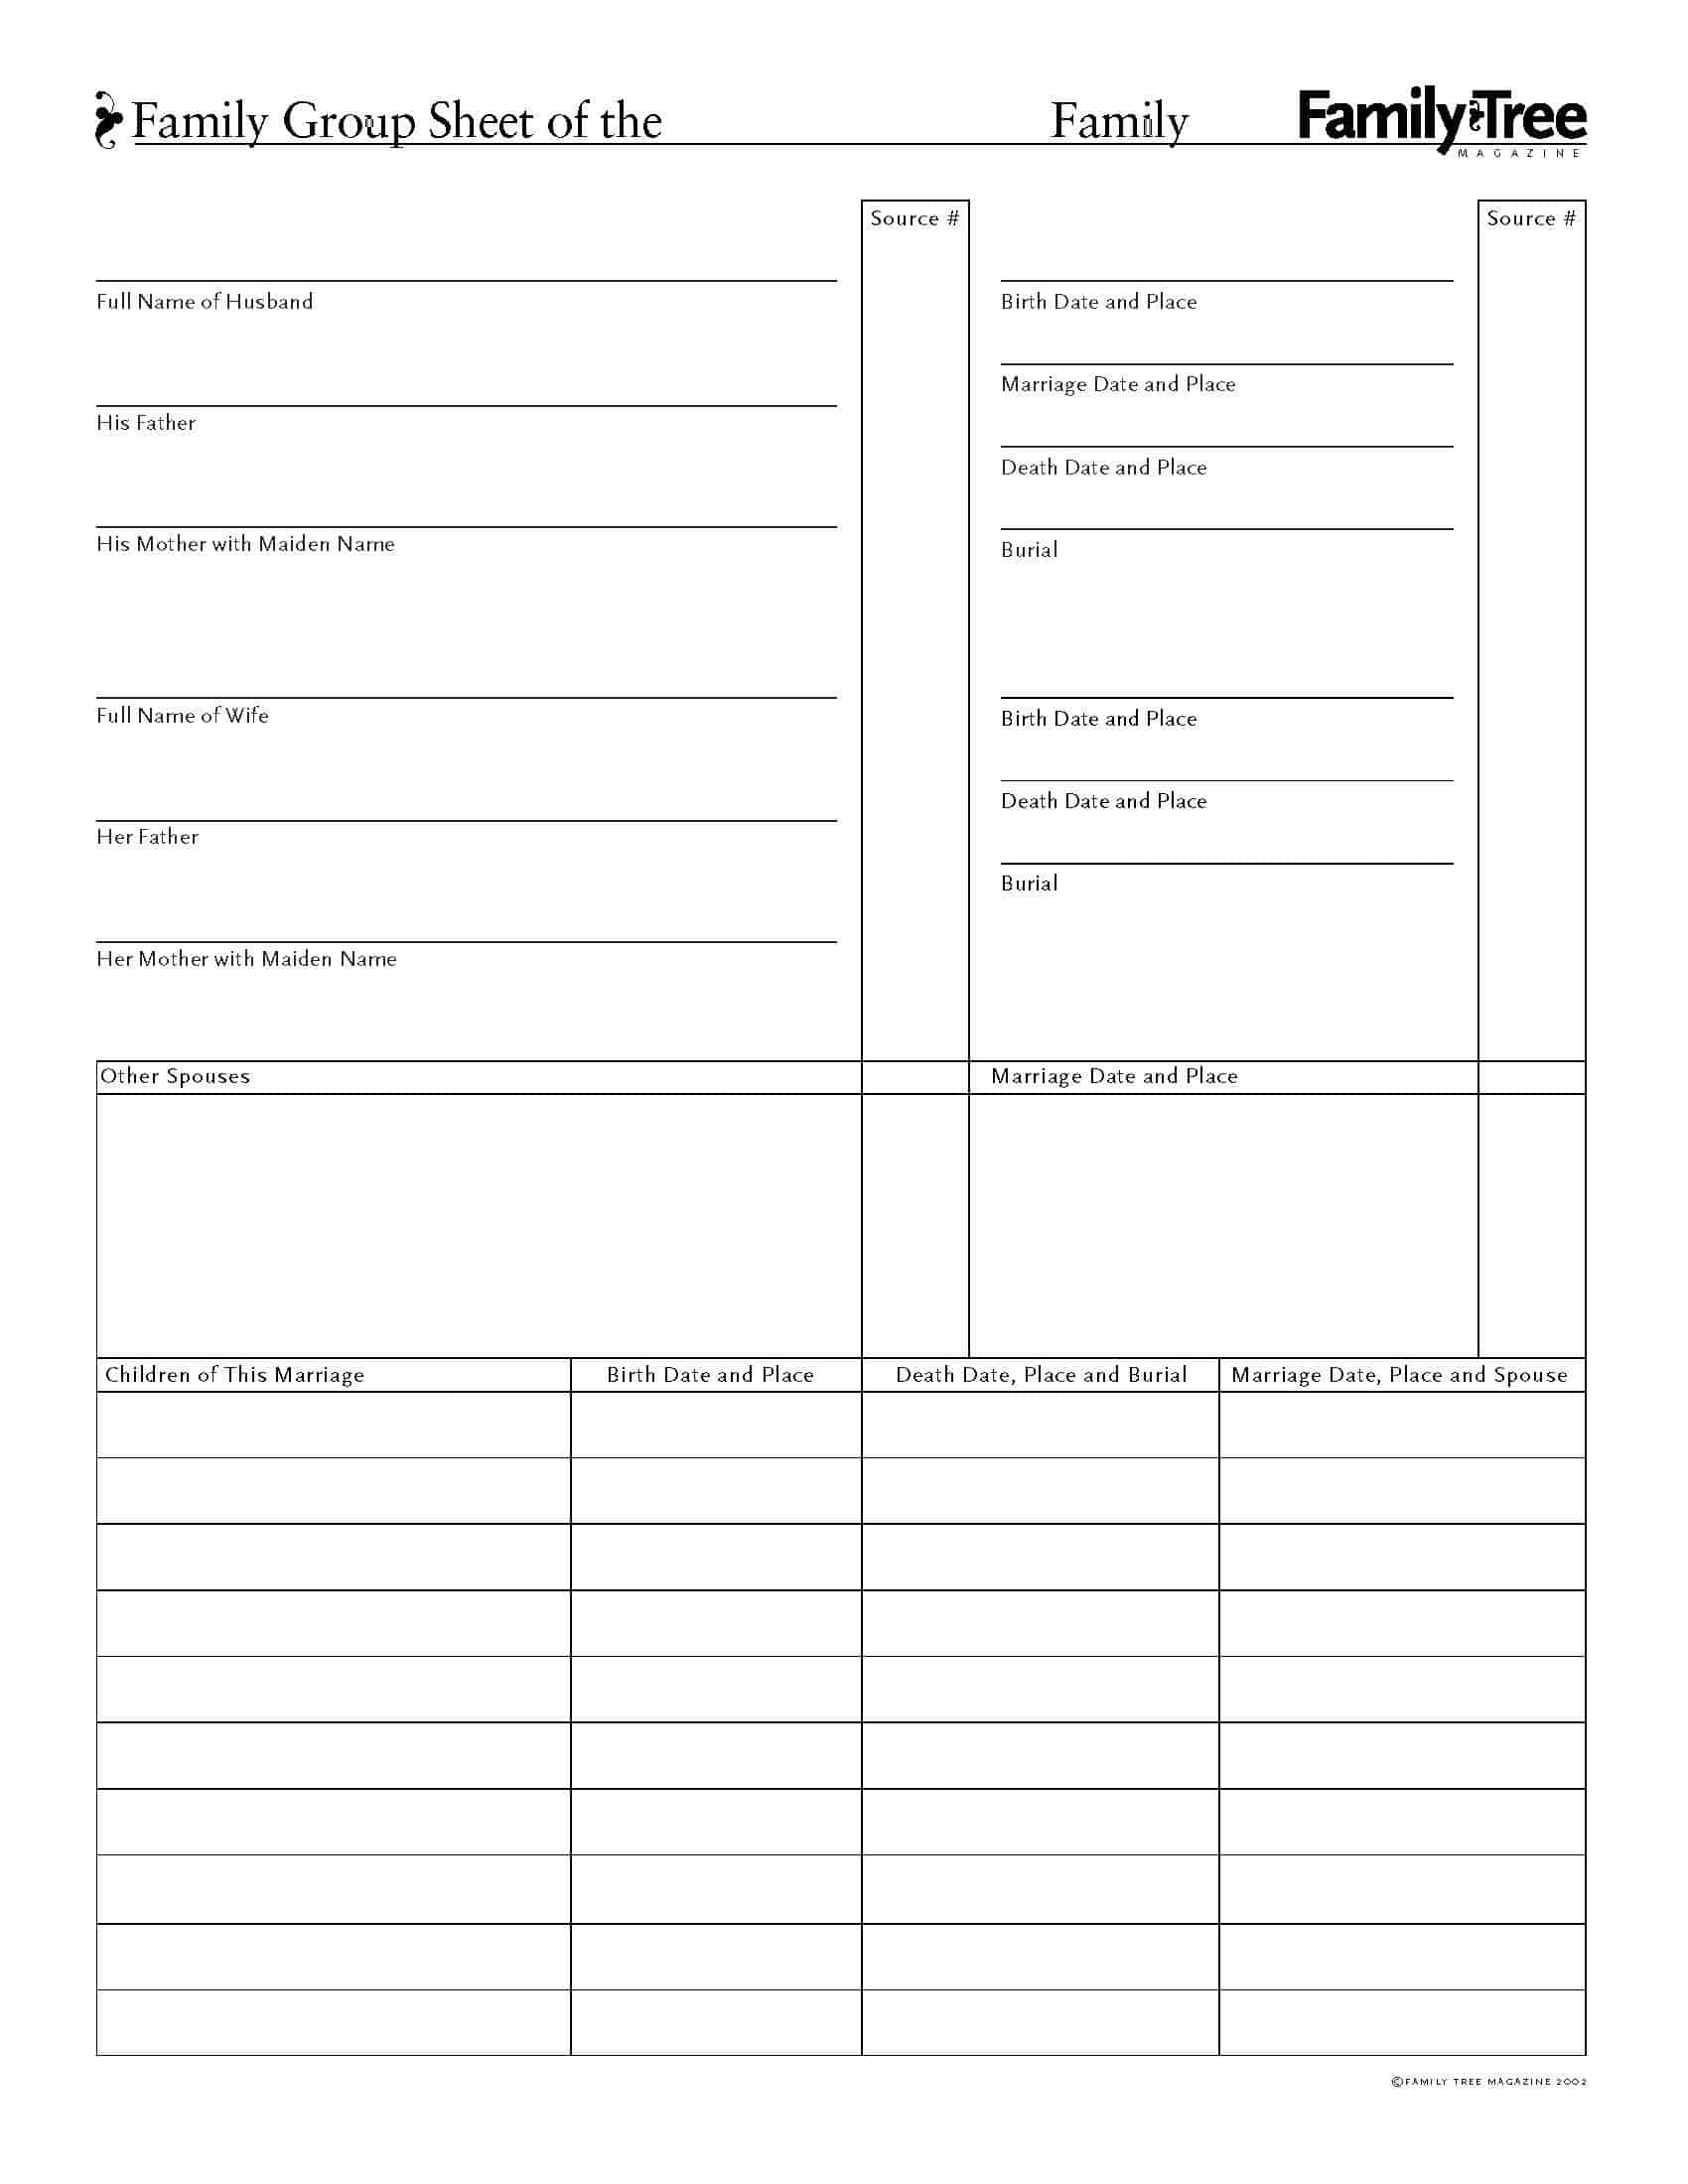 Family Tree Chart for Cousins - Free Genealogy Sheet